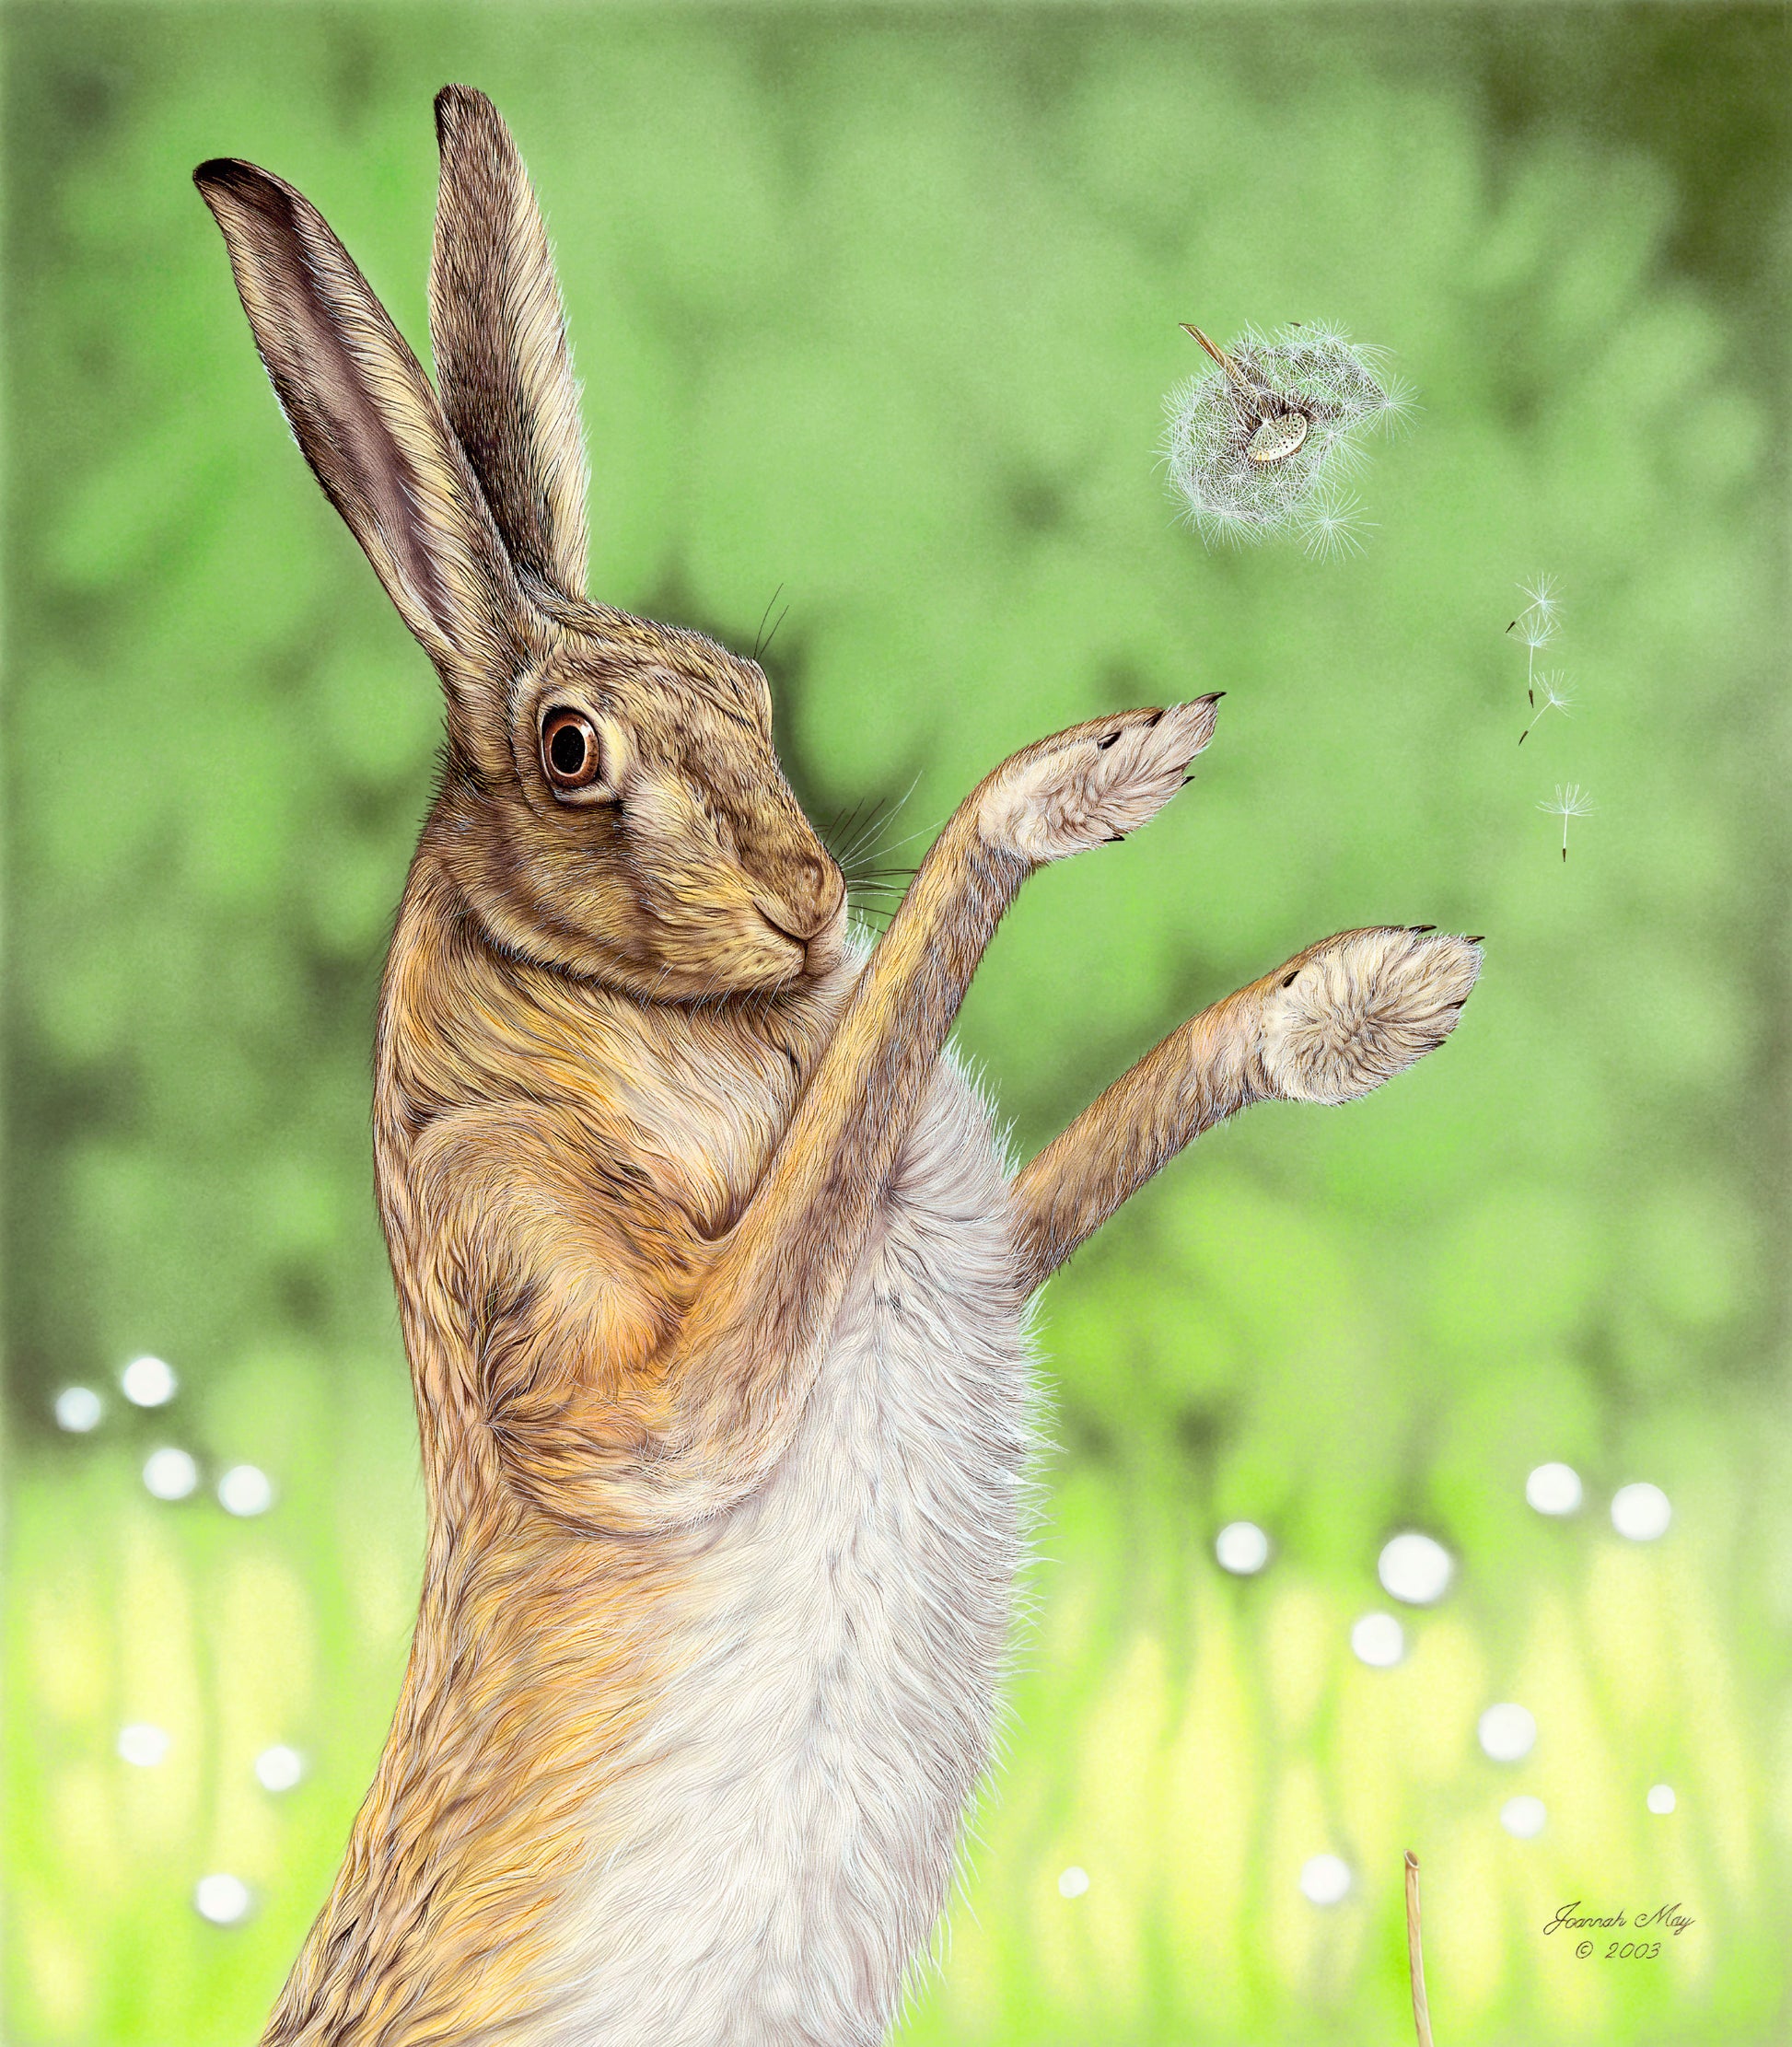 Female hare kicking a dandelion into the air